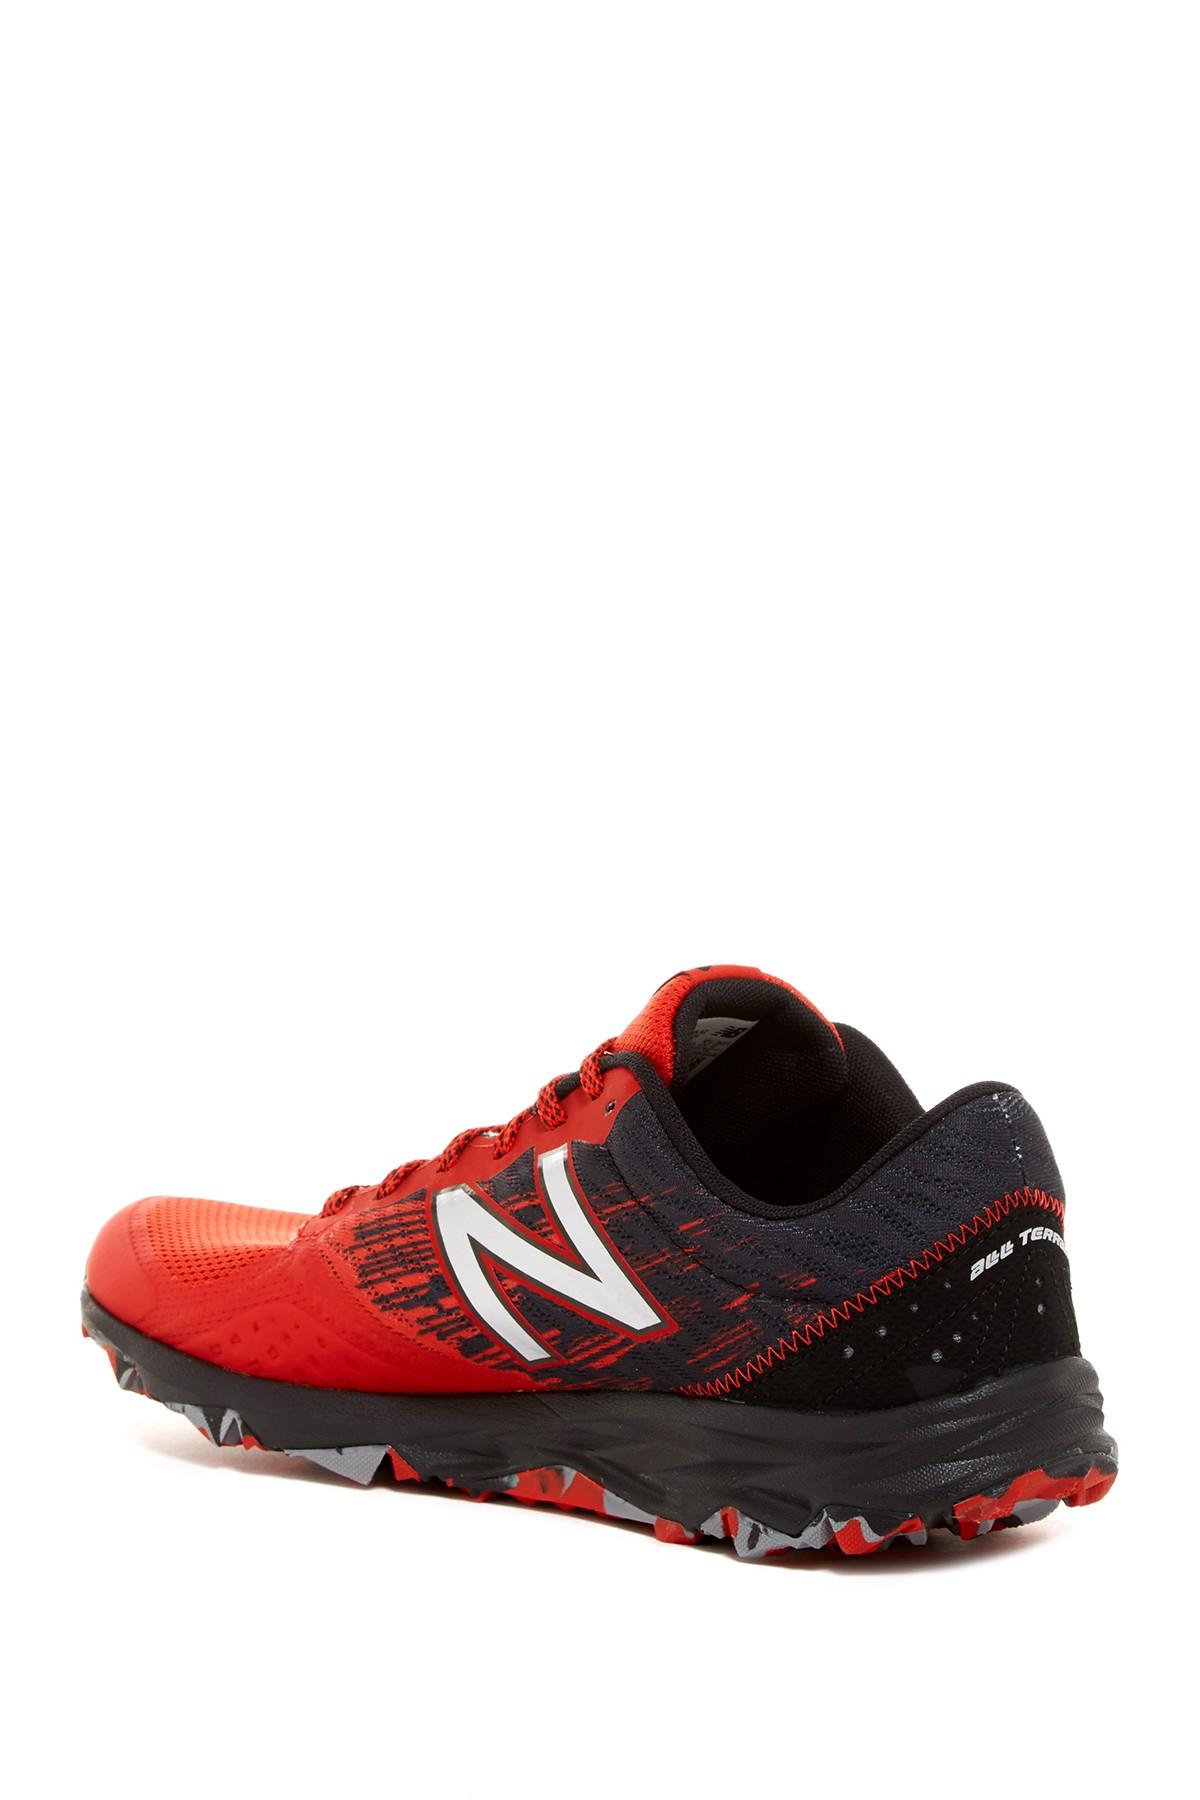 New Balance Synthetic 690v2 Trail Running Shoe in Red-Black (Red) for Men |  Lyst